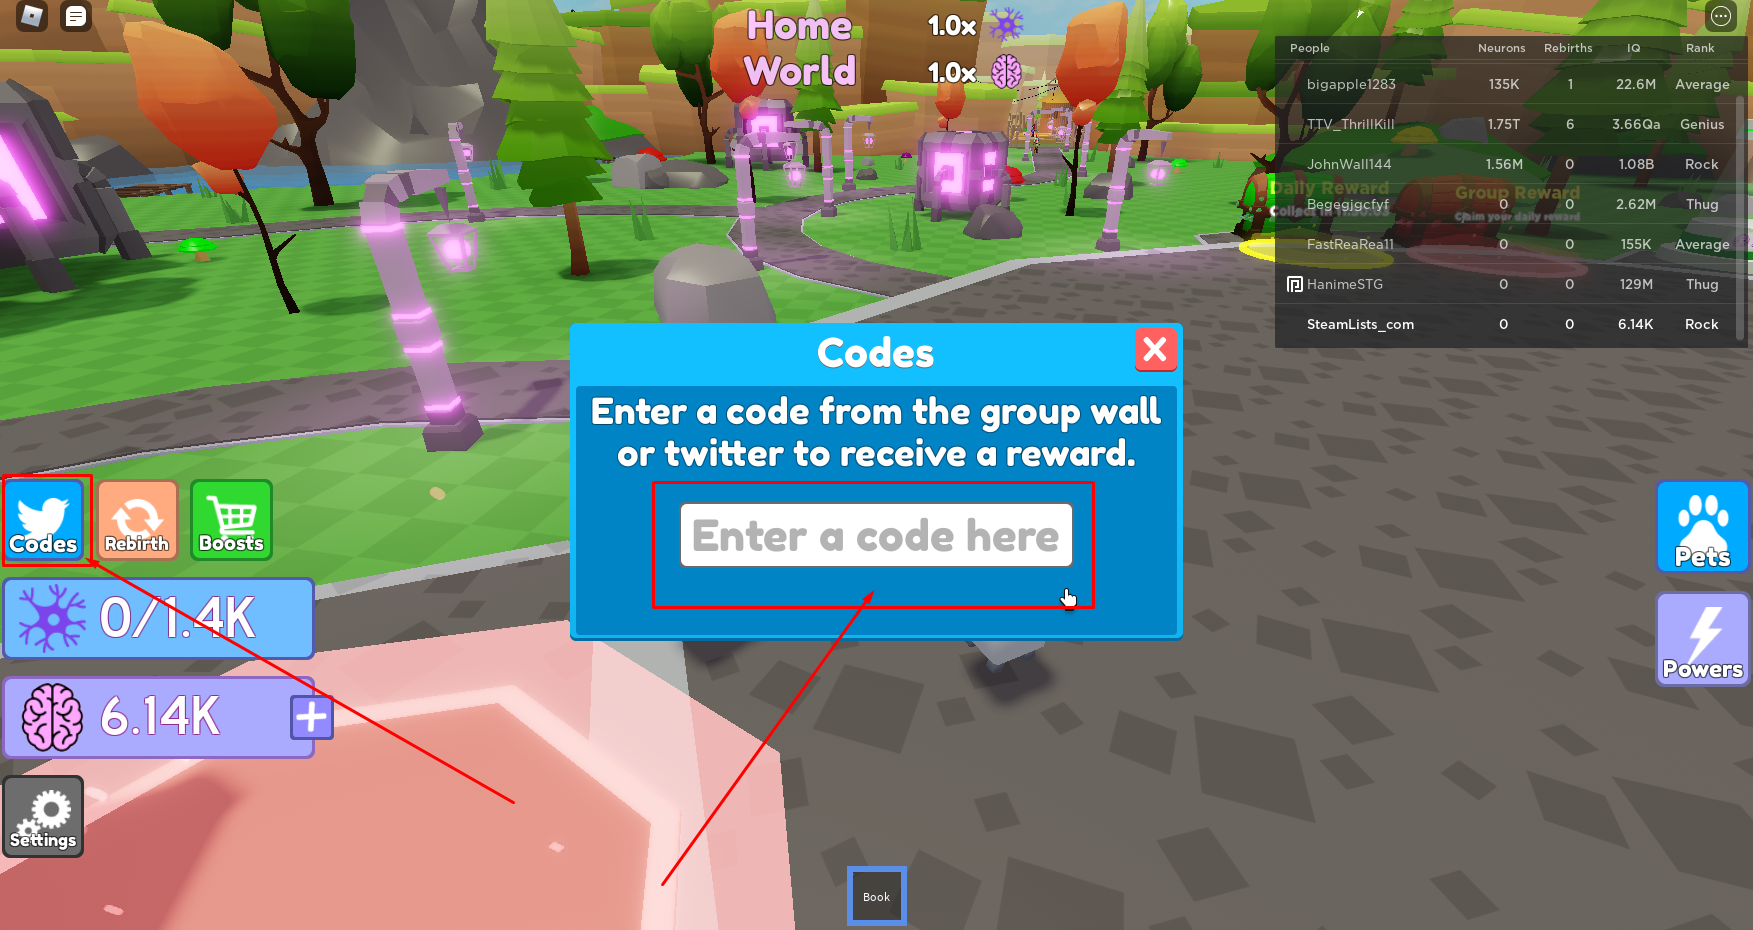 Roblox Genius Simulator Codes Free IQ And Luck August 2022 Steam Lists